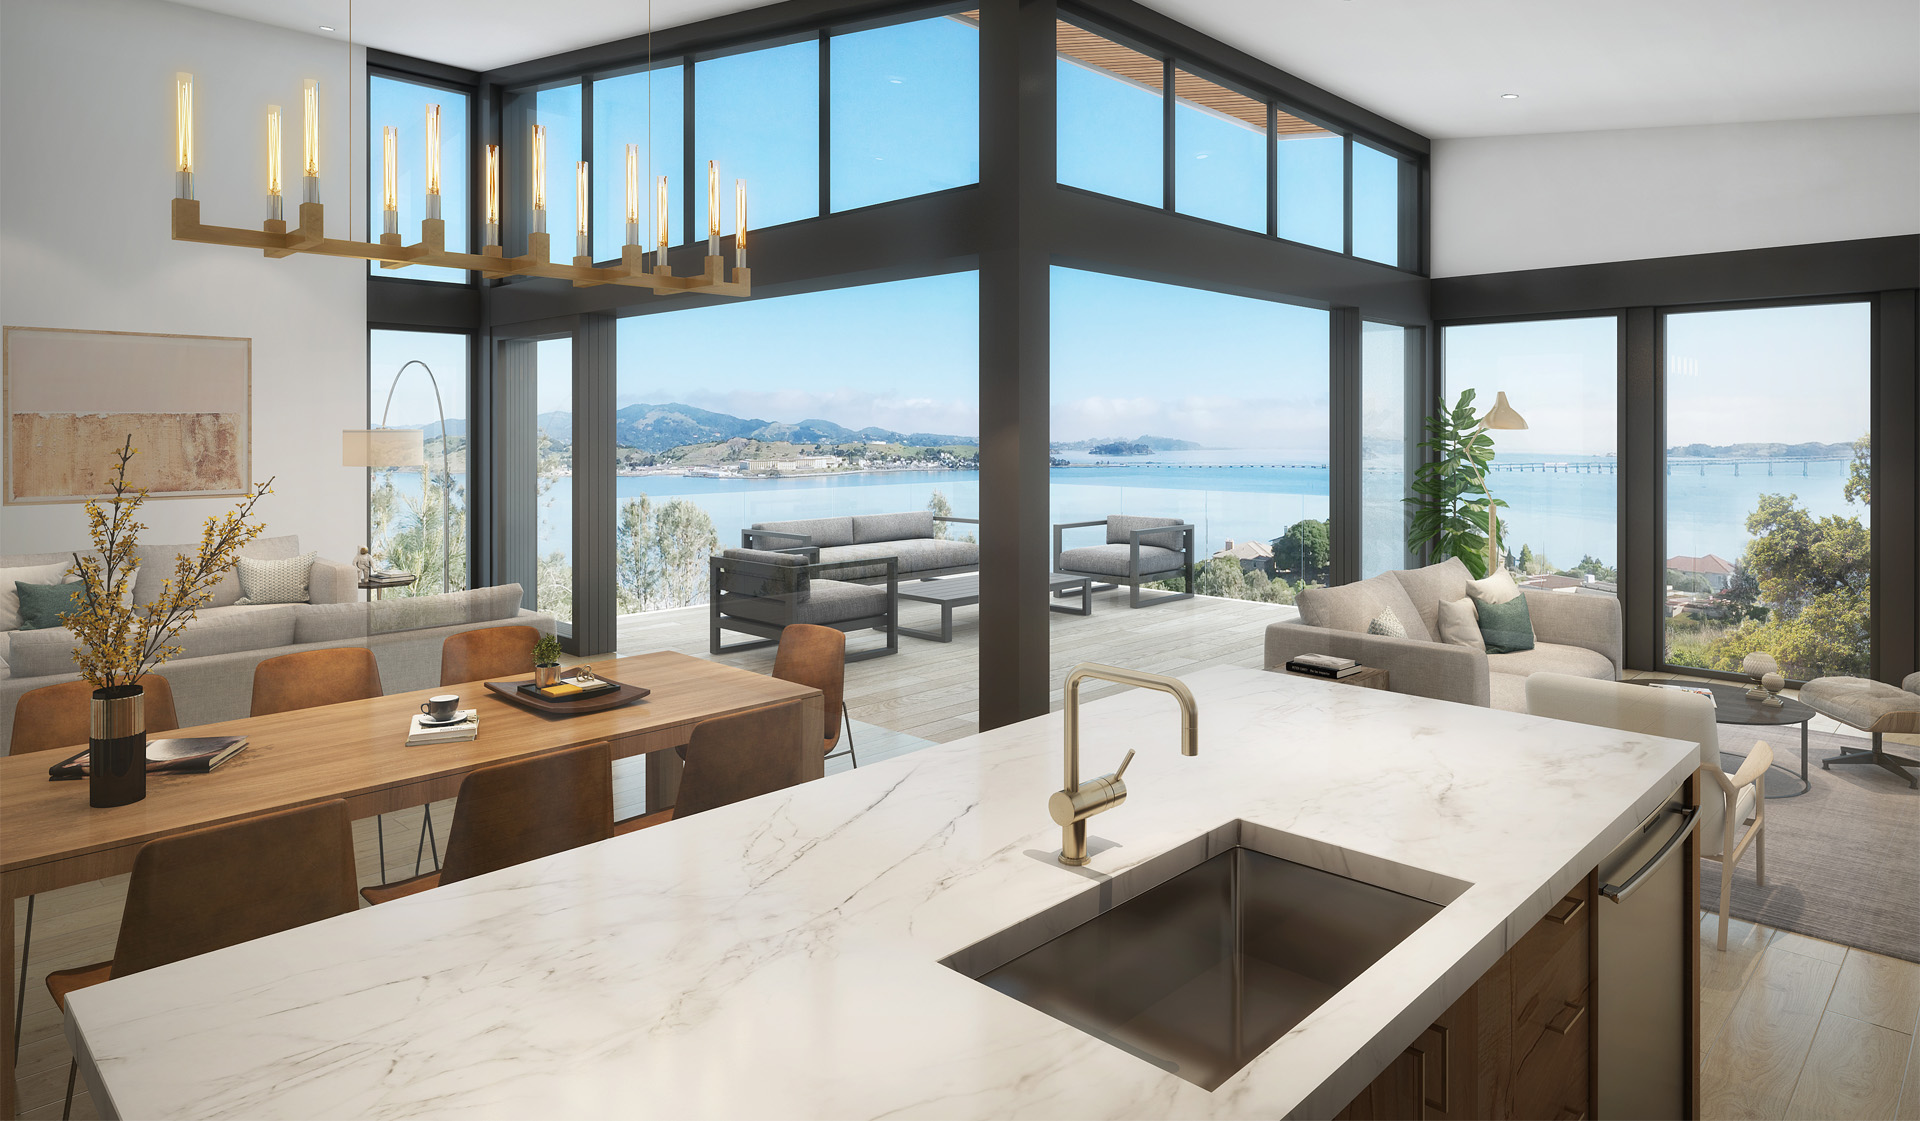 Oak Shore - View of Kitchen, Living Room, Dining Room, Patio and view of ocean and mountains